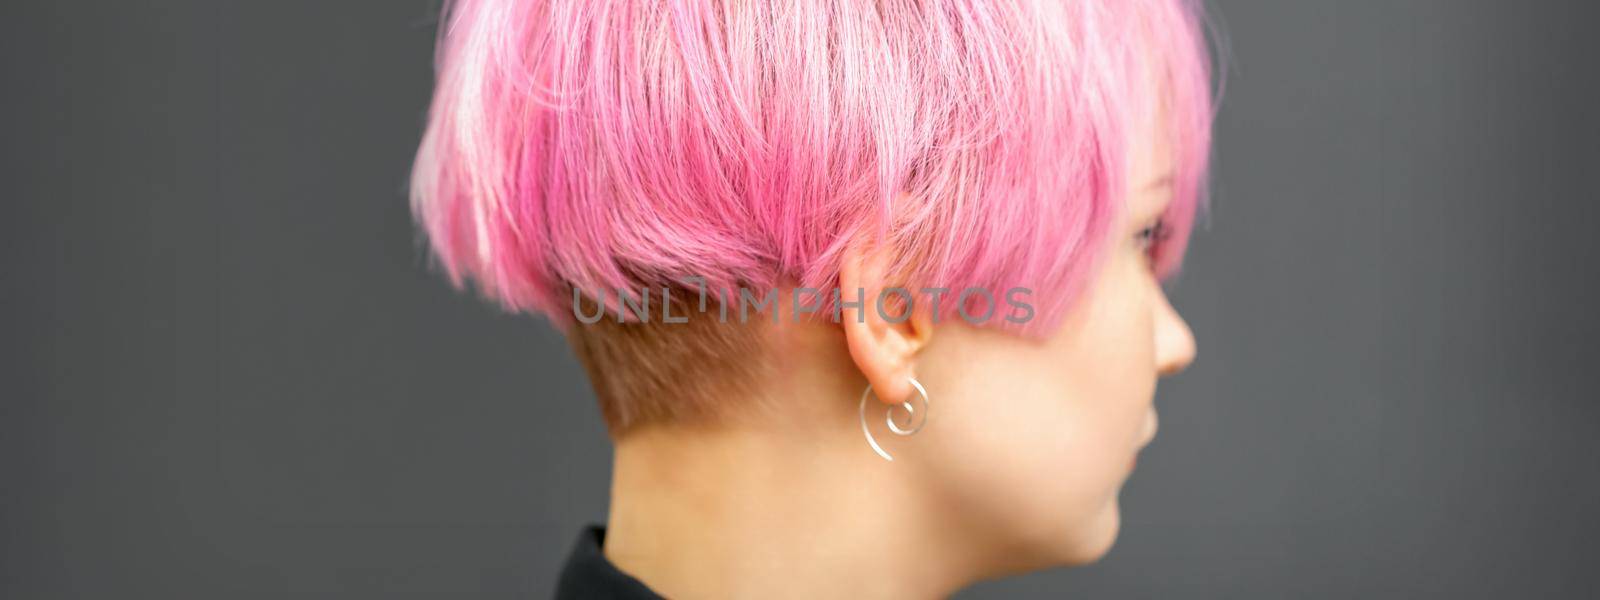 Profile of a beautiful young caucasian woman with short bob pink hairstyle on dark gray background